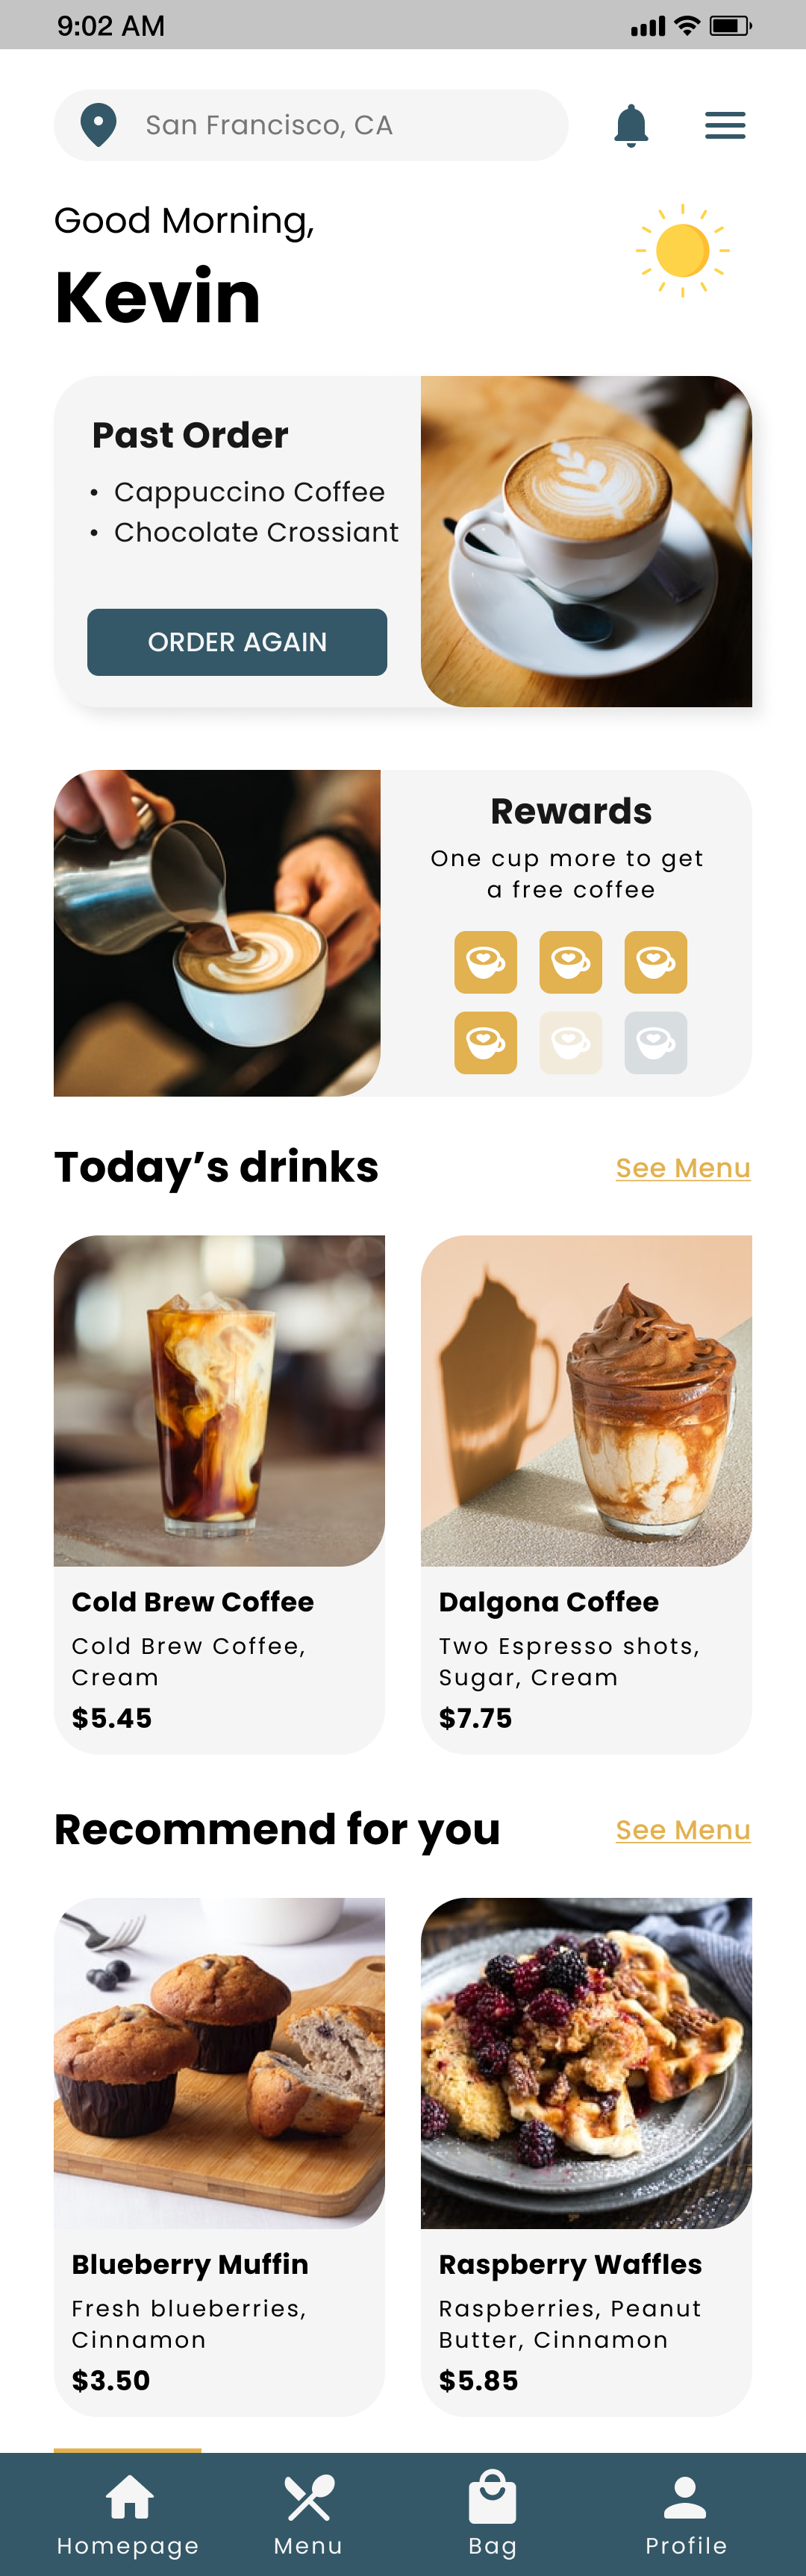 COCO Homepage screen for mobile app